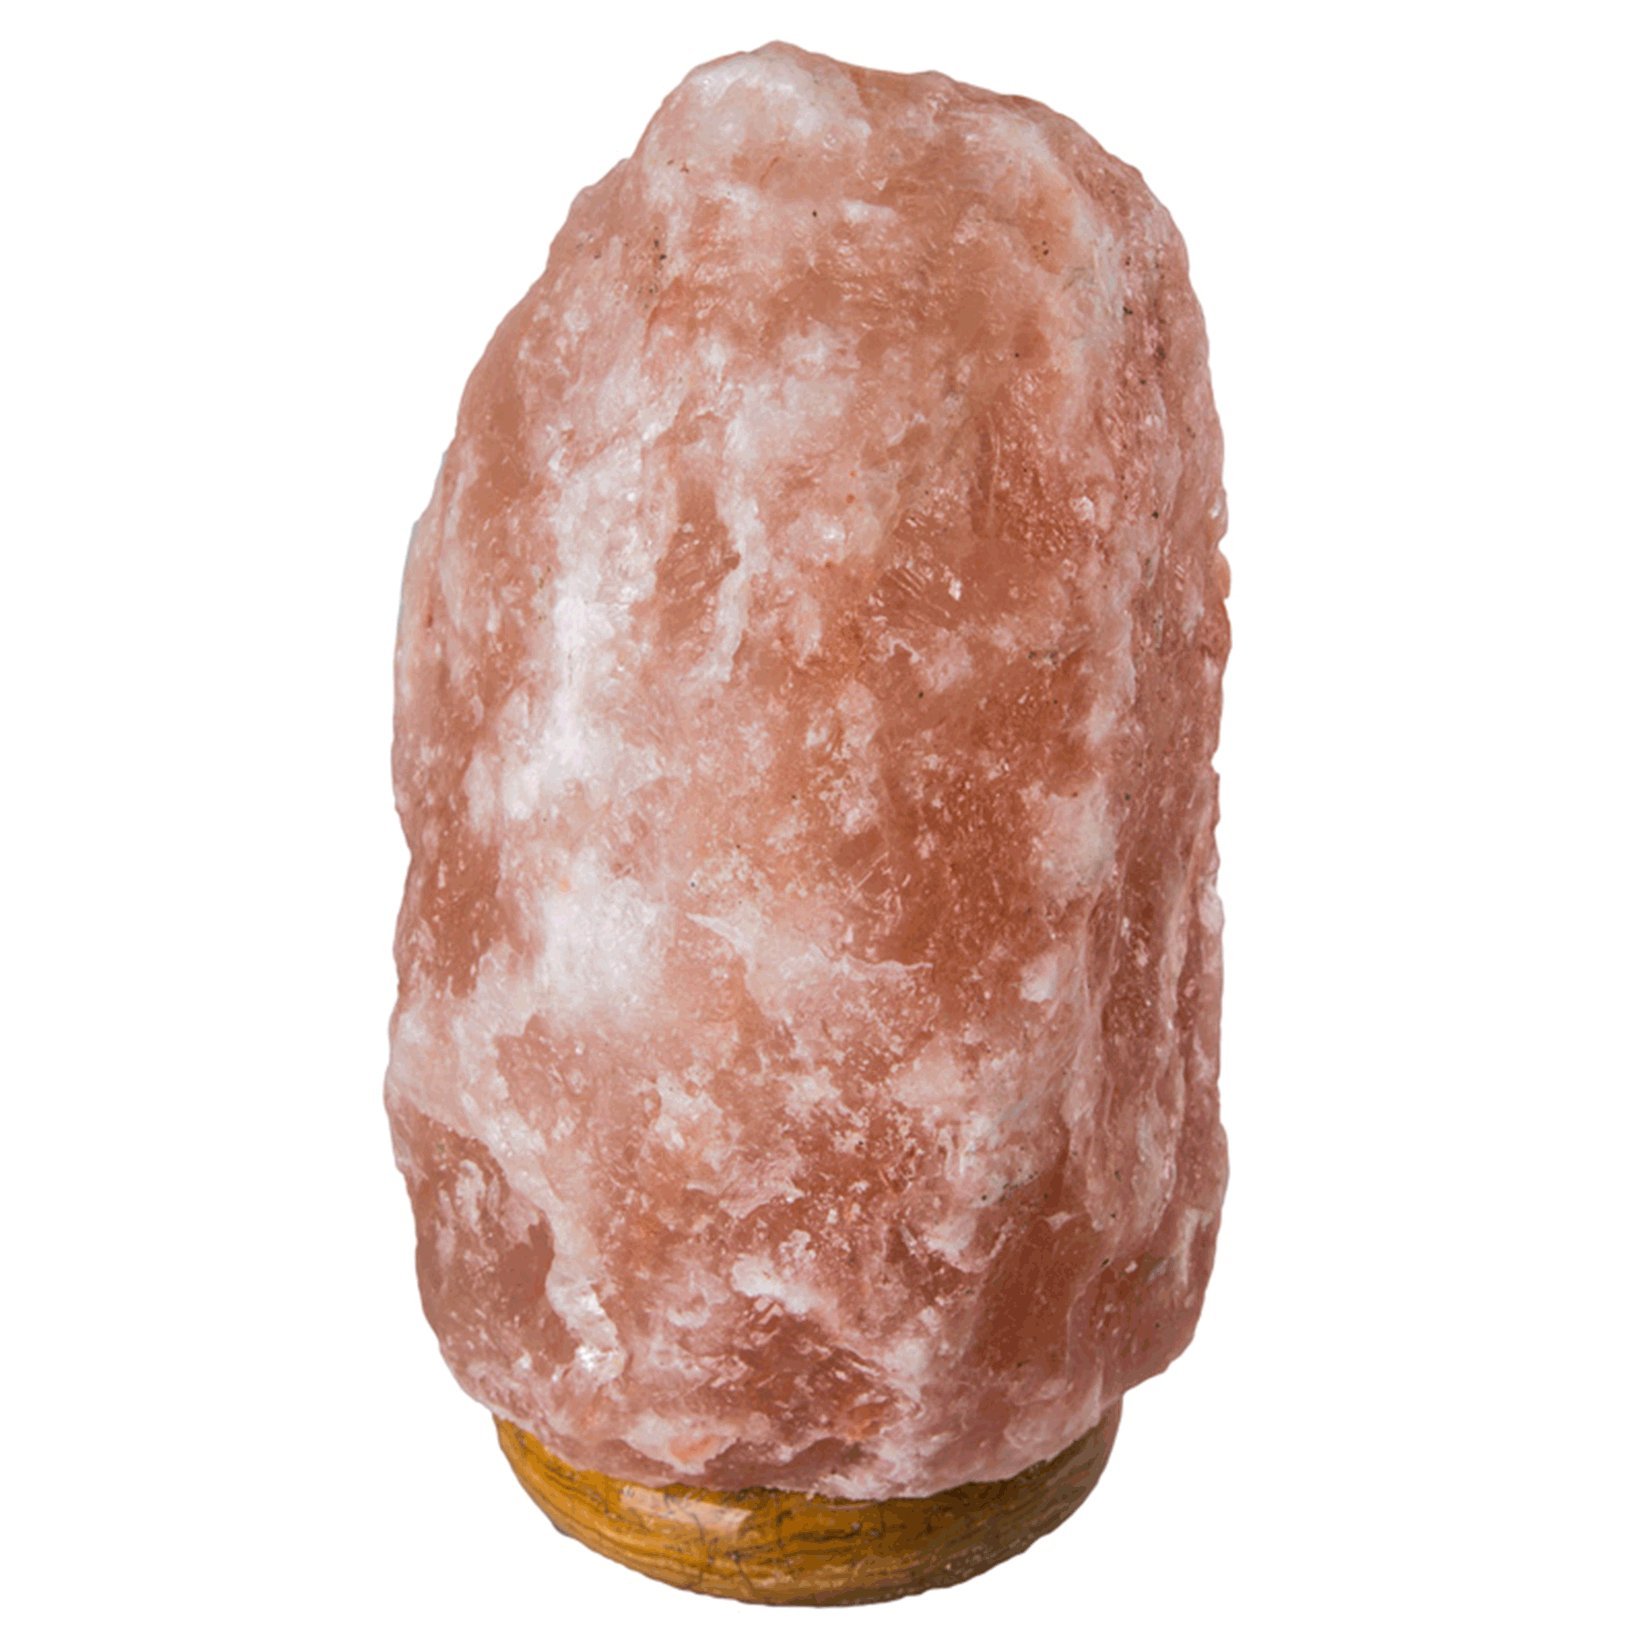 100% Pure and Authentic Himalayan Salt Lamp 15-20lbs by Black Tai Salt Co.